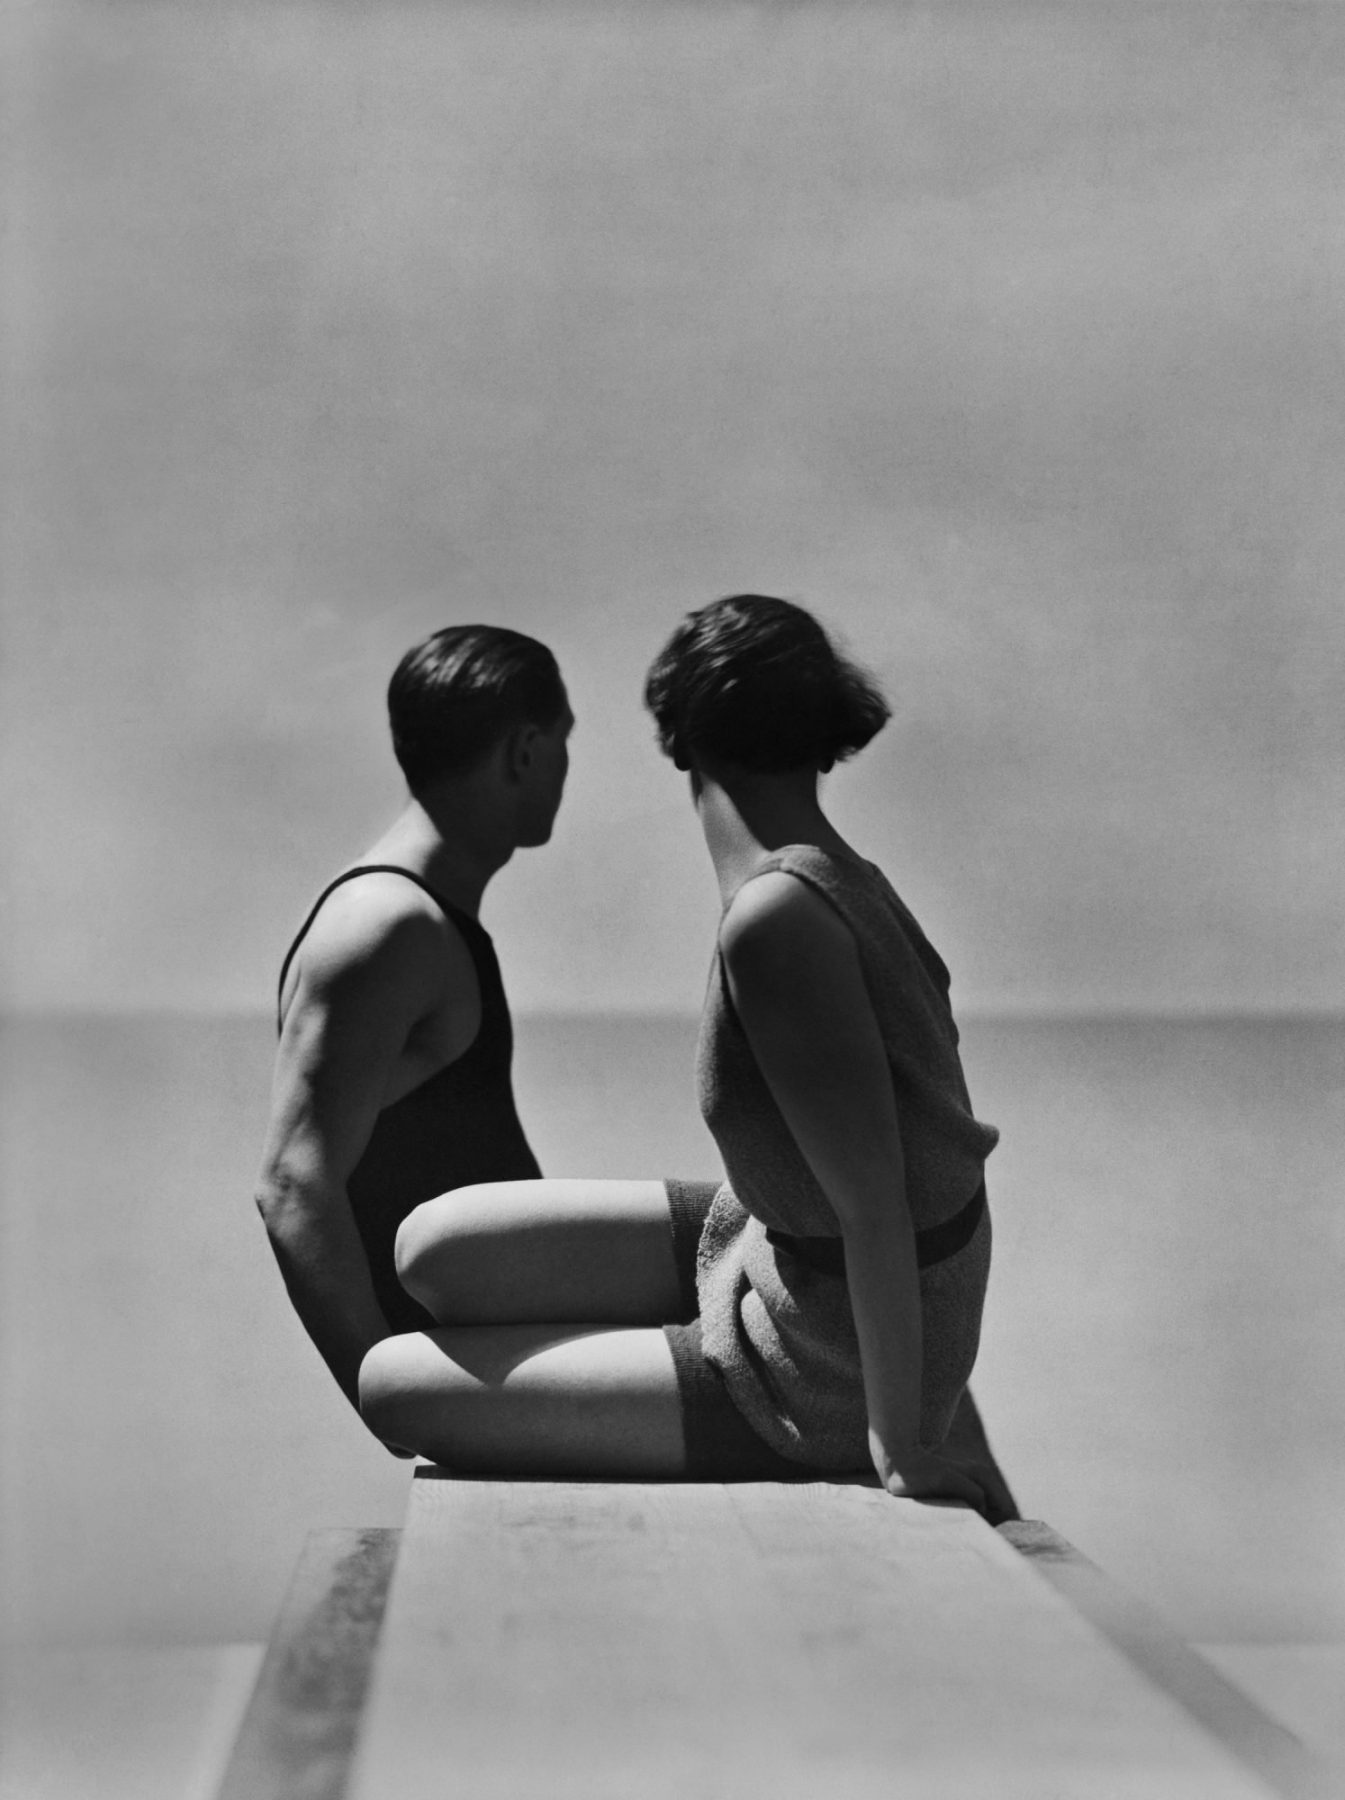 The Divers, swimwear by Izod, photo by George Hoyningen-Huene, 1930, one of the models was Horst P. Horst